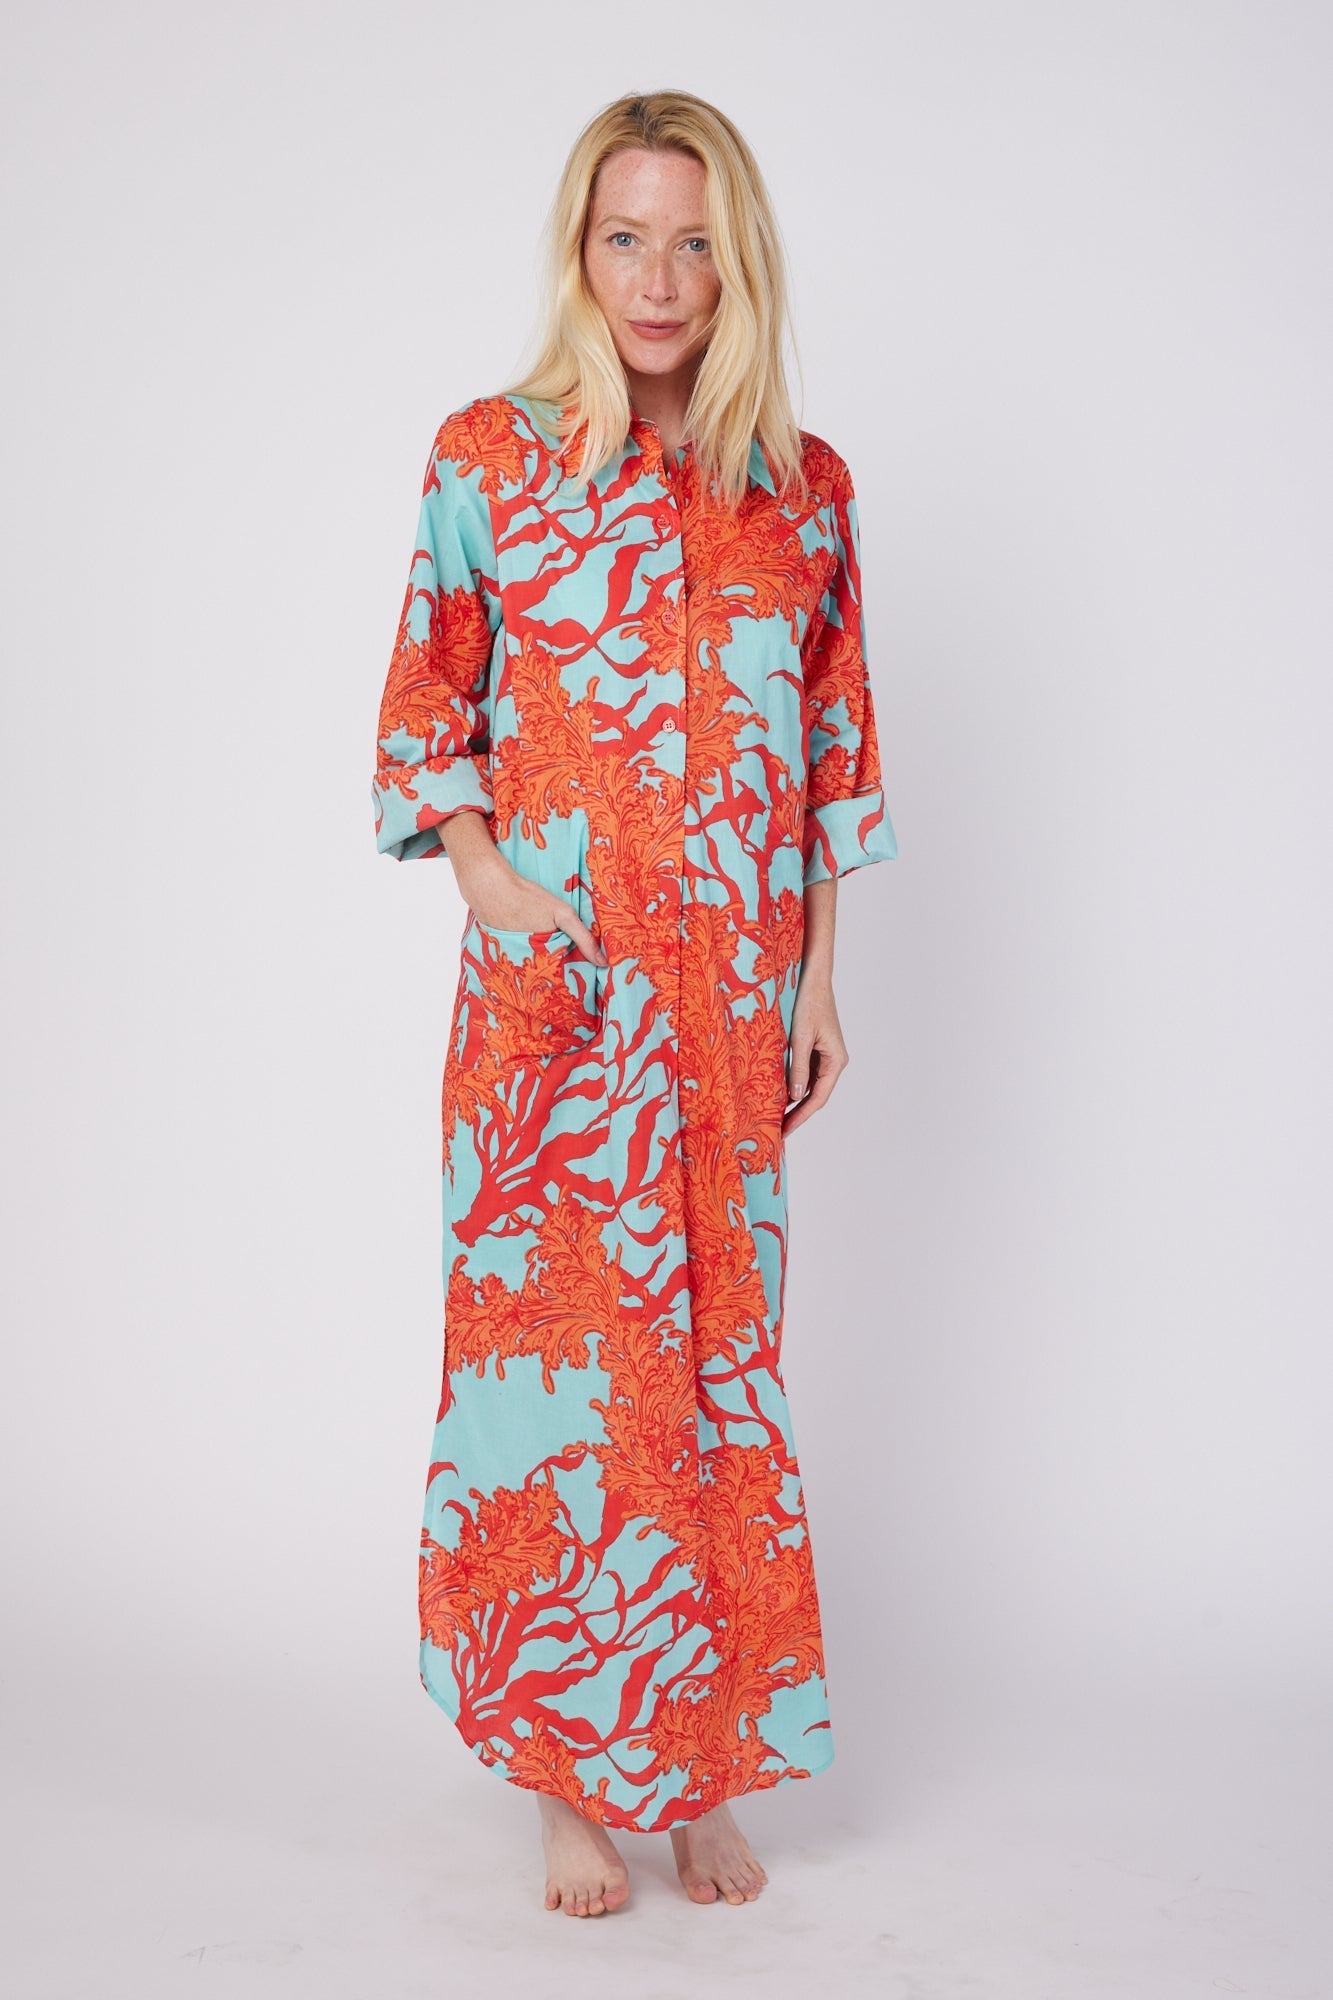 ModaPosa Gabriella 3/4 Sleeve Maxi Shirt Dress with Collar and Pockets in Turquoise Pink Coral . Discover women's resort dresses and lifestyle clothing inspired by the Mediterranean. Free worldwide shipping available!